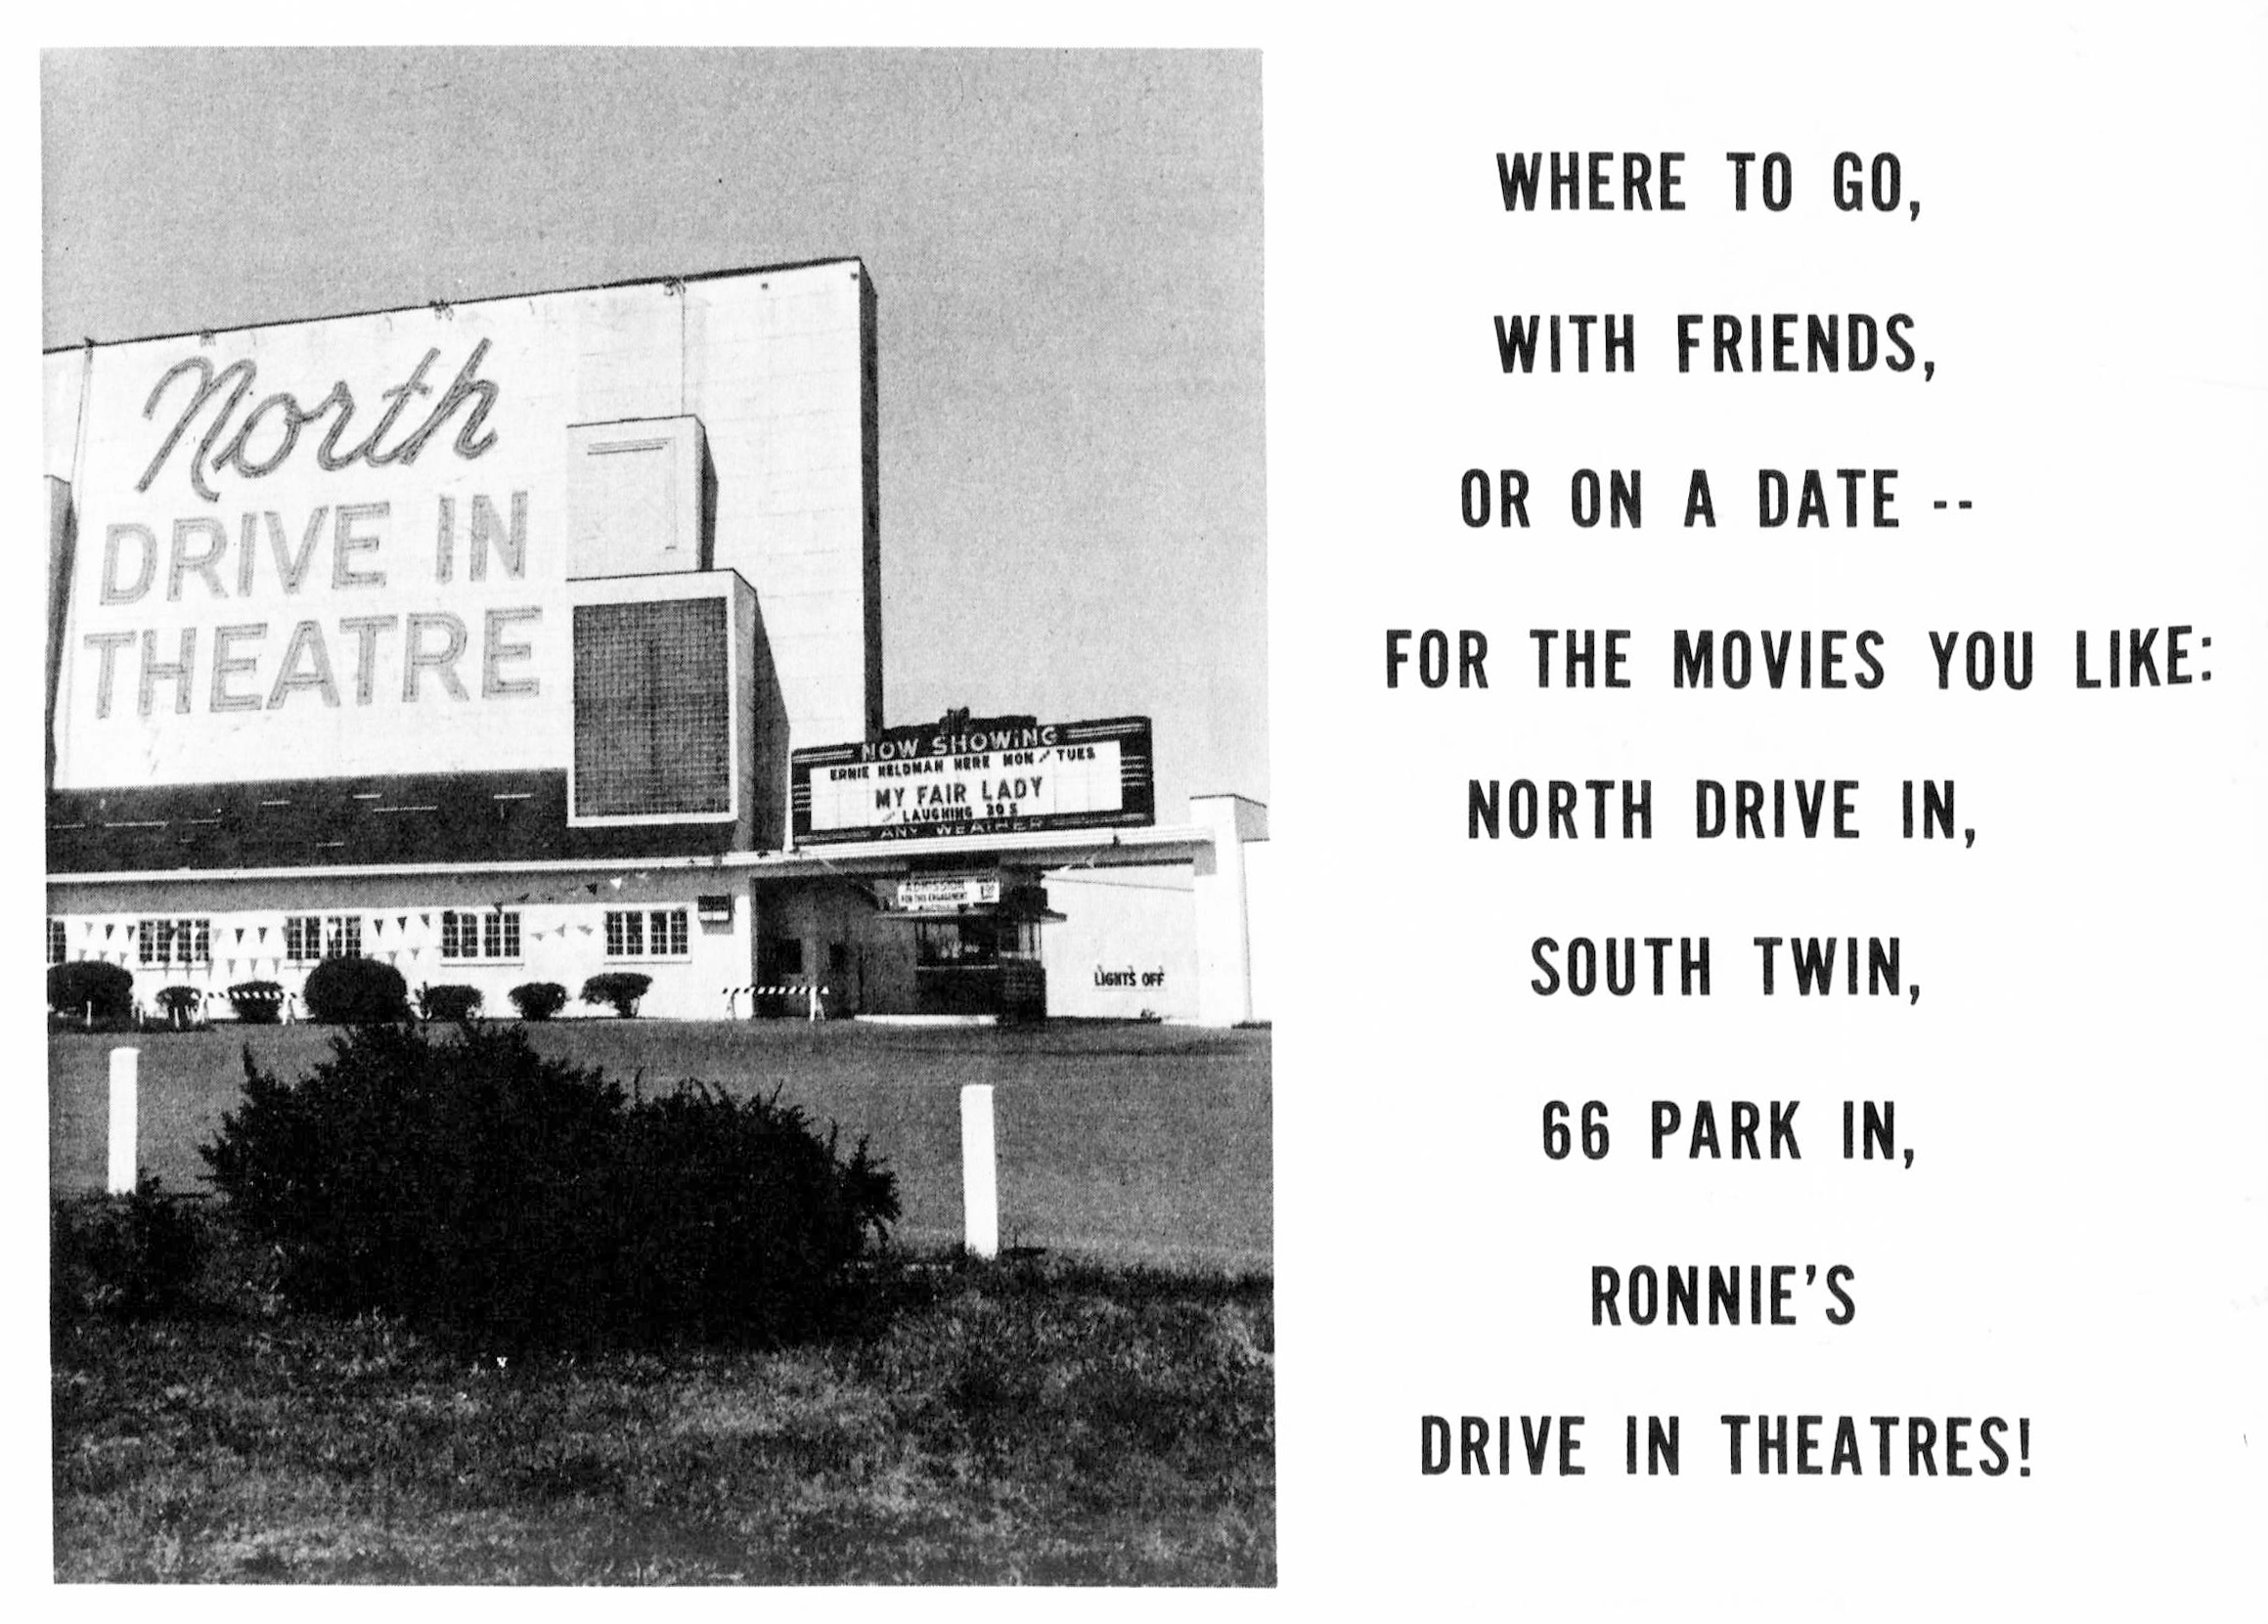 NORTH DRIVE IN THEATRE ad featured in PROM MAGAZINE JULY 1967